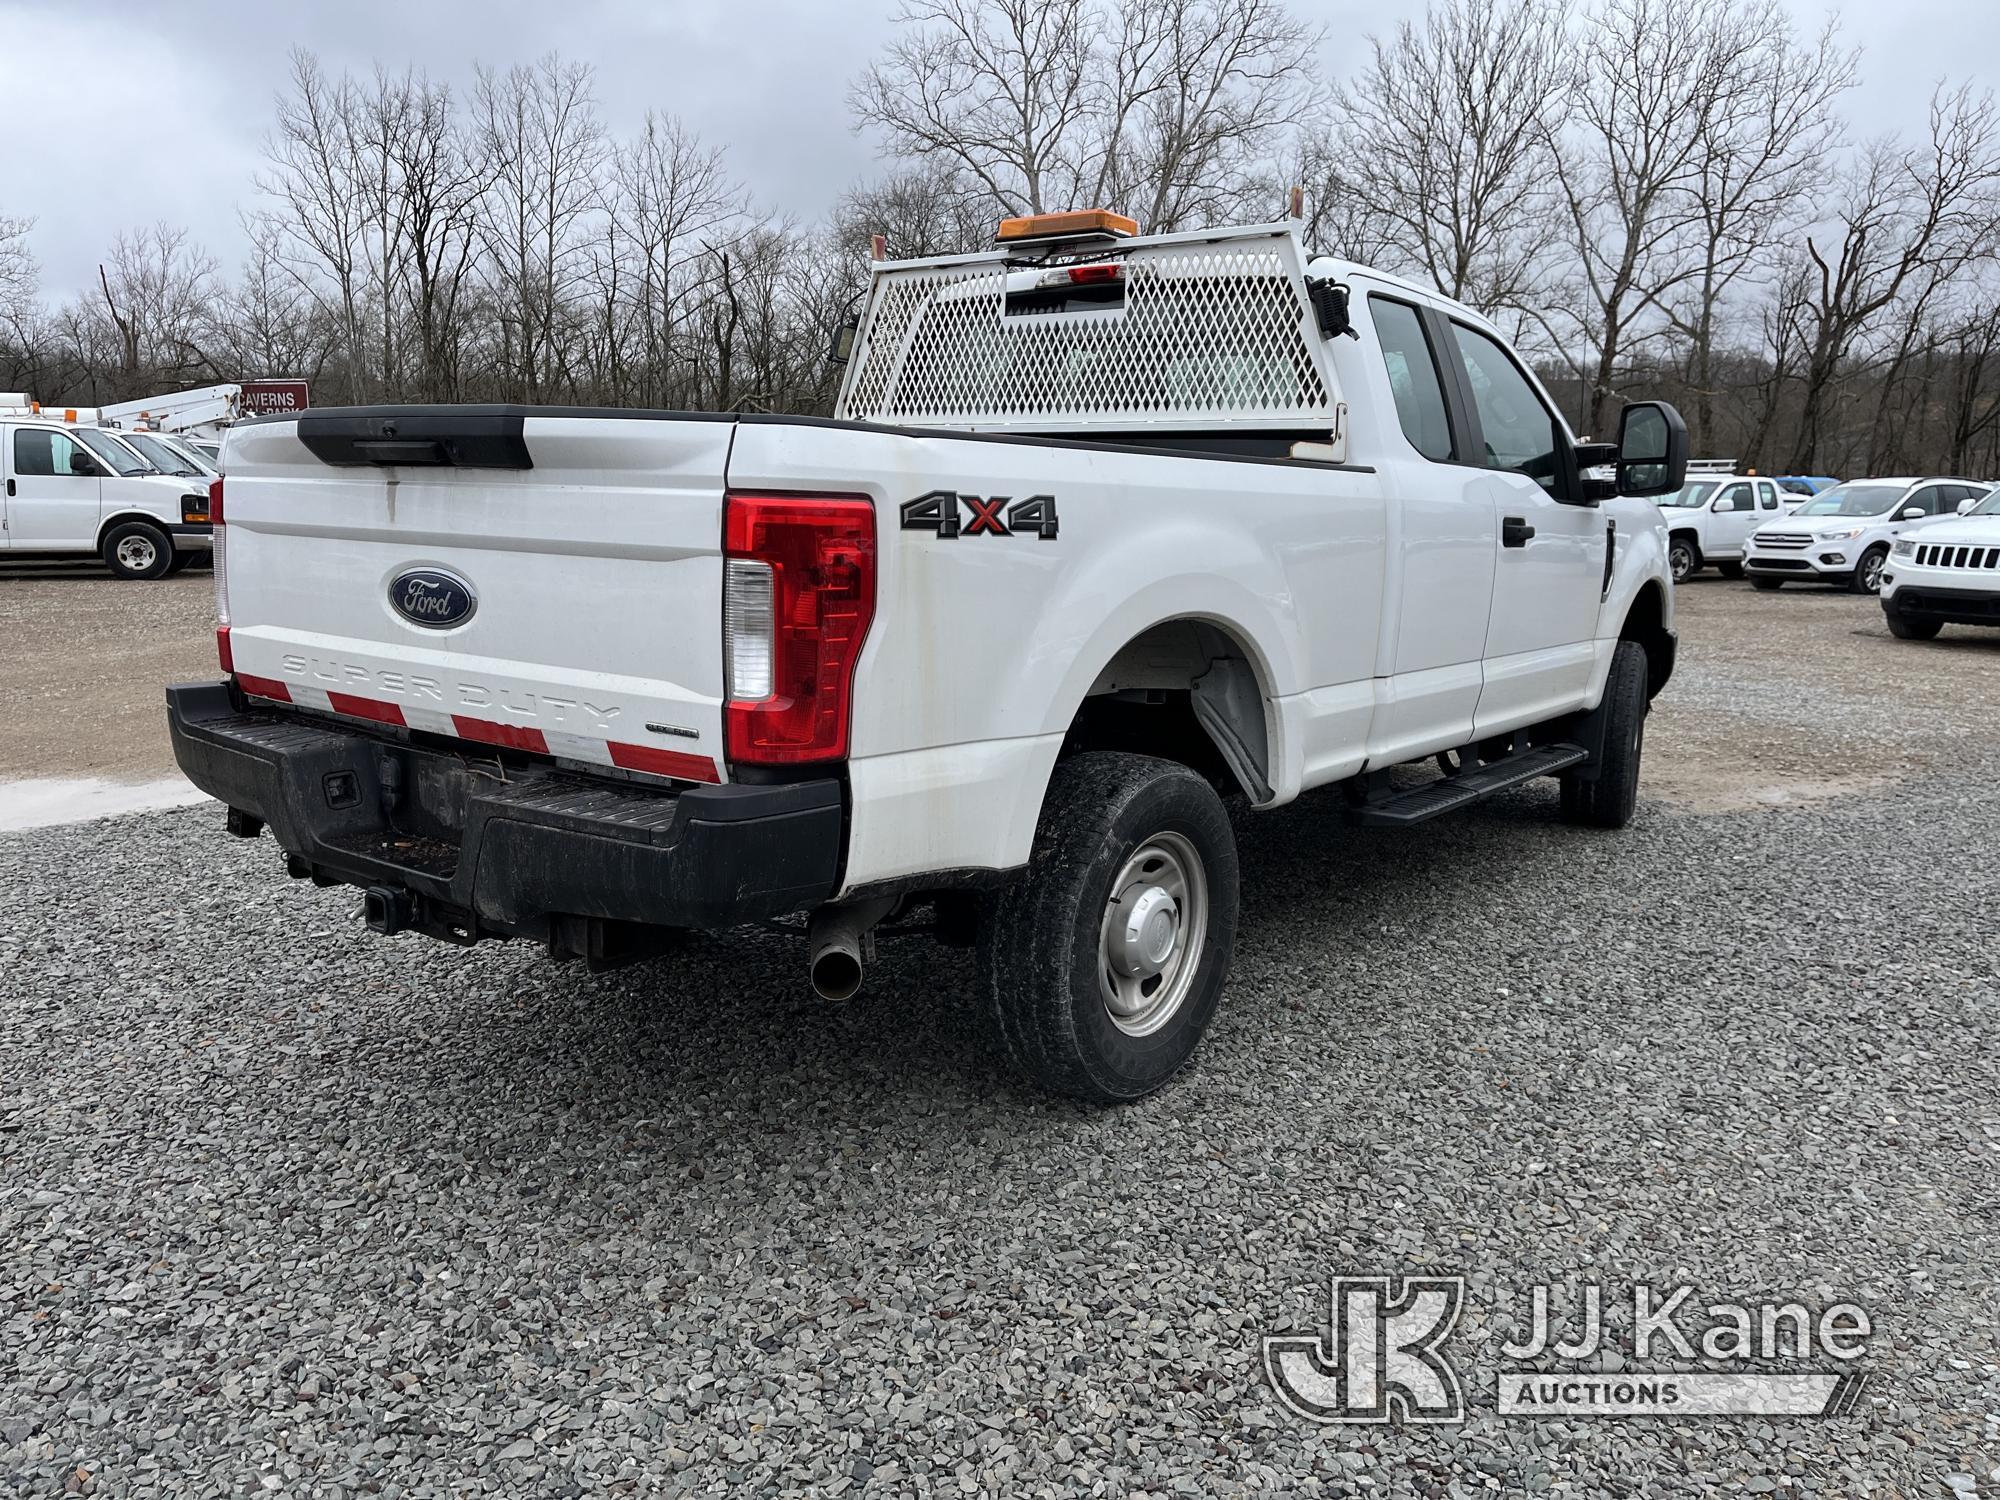 (Smock, PA) 2017 Ford F250 4x4 Extended-Cab Pickup Truck Runs & Moves, Rust Damage